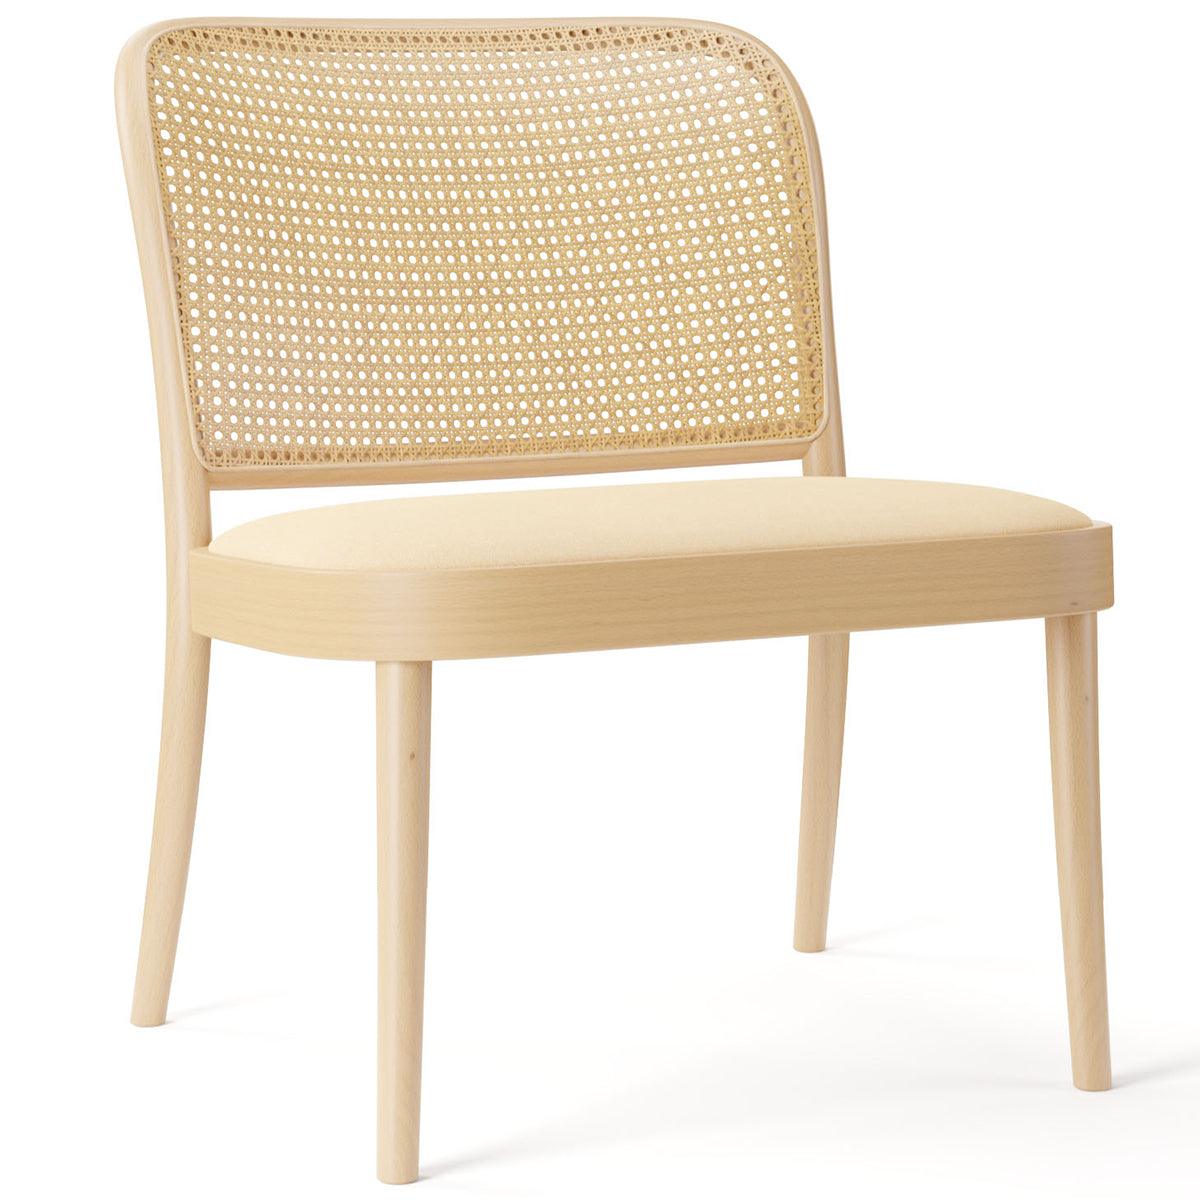 811 Upholstered/Cane Lounge Chair - WOO .Design